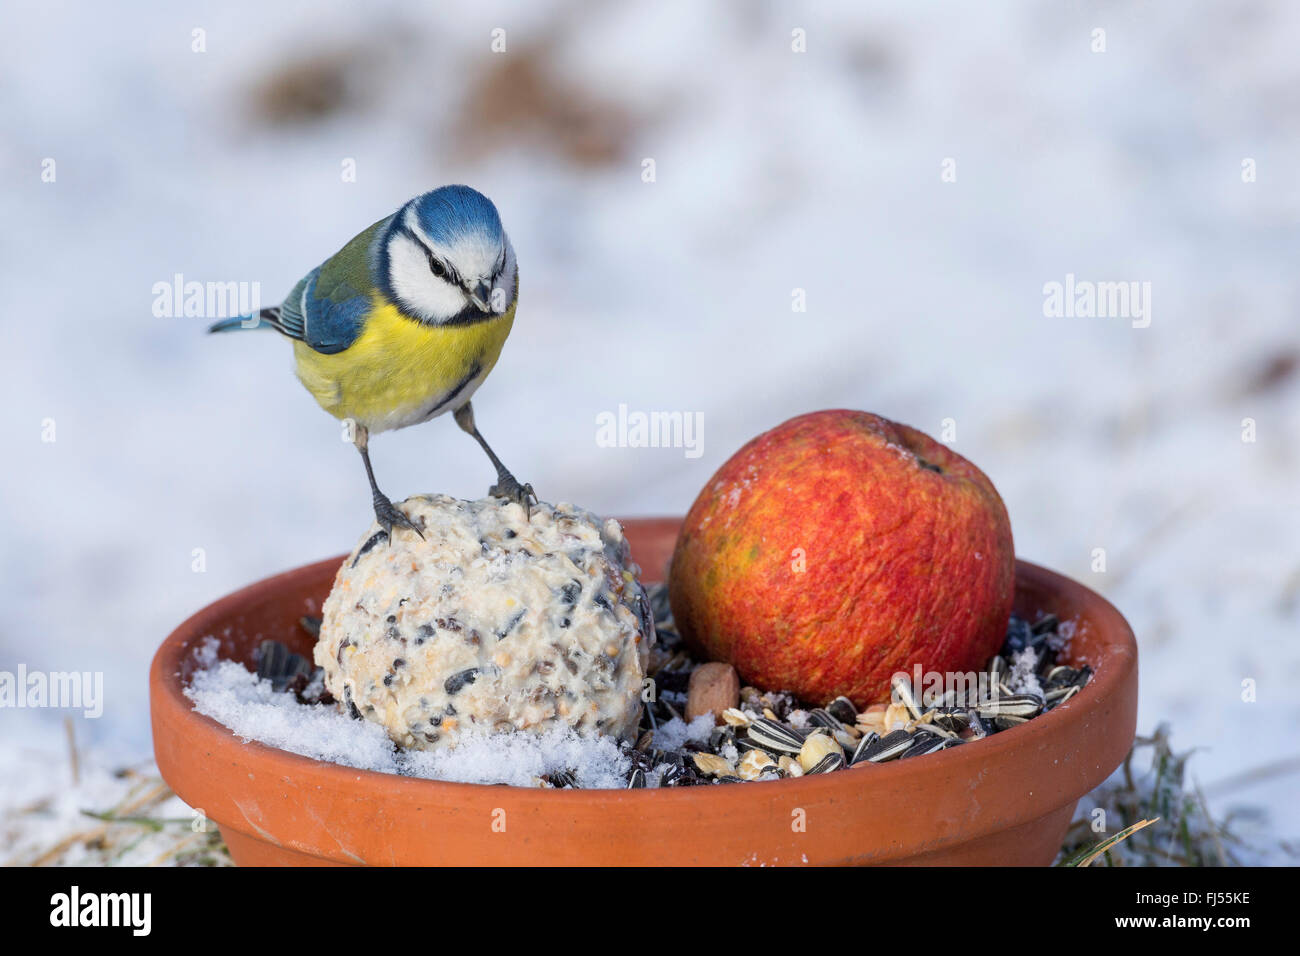 blue tit (Parus caeruleus, Cyanistes caeruleus), at winter feeding site with apple and fat ball, Germany Stock Photo